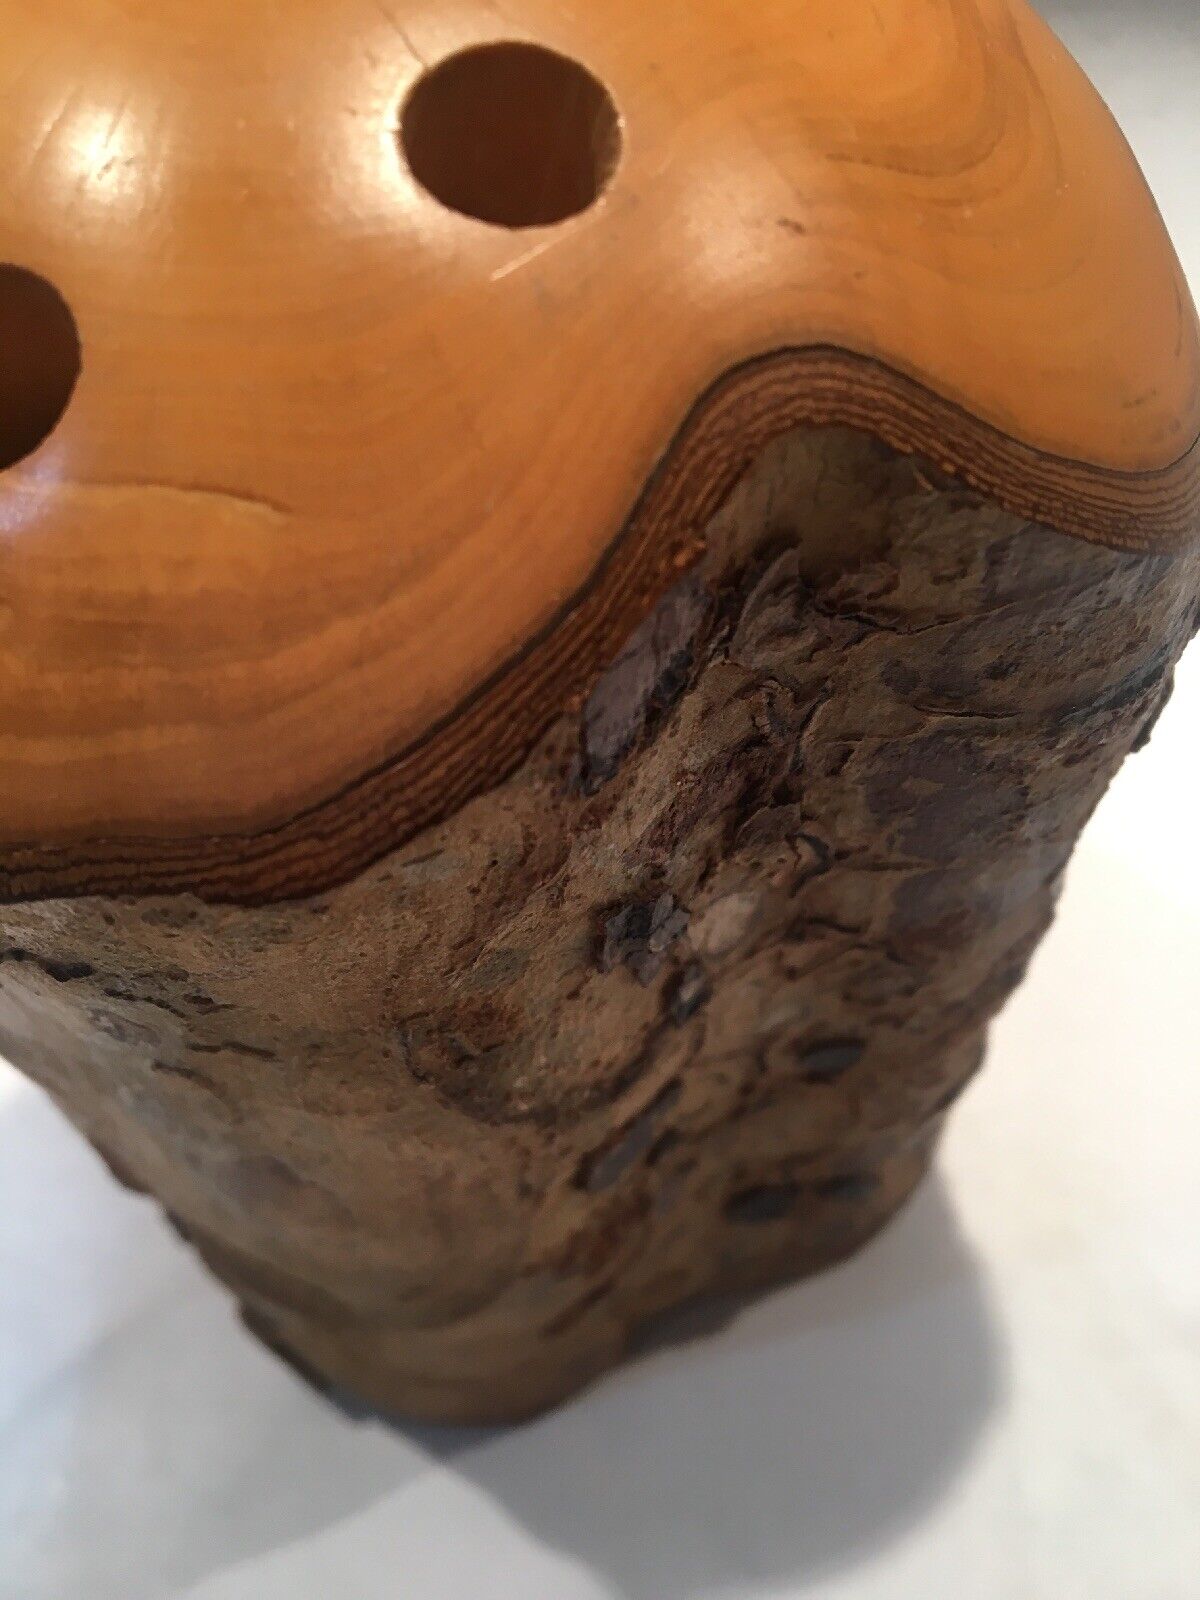 Beautiful Pen Pencil Holder From Daintree Timber Gallery Australia Maplewood Super korting, speciale prijs